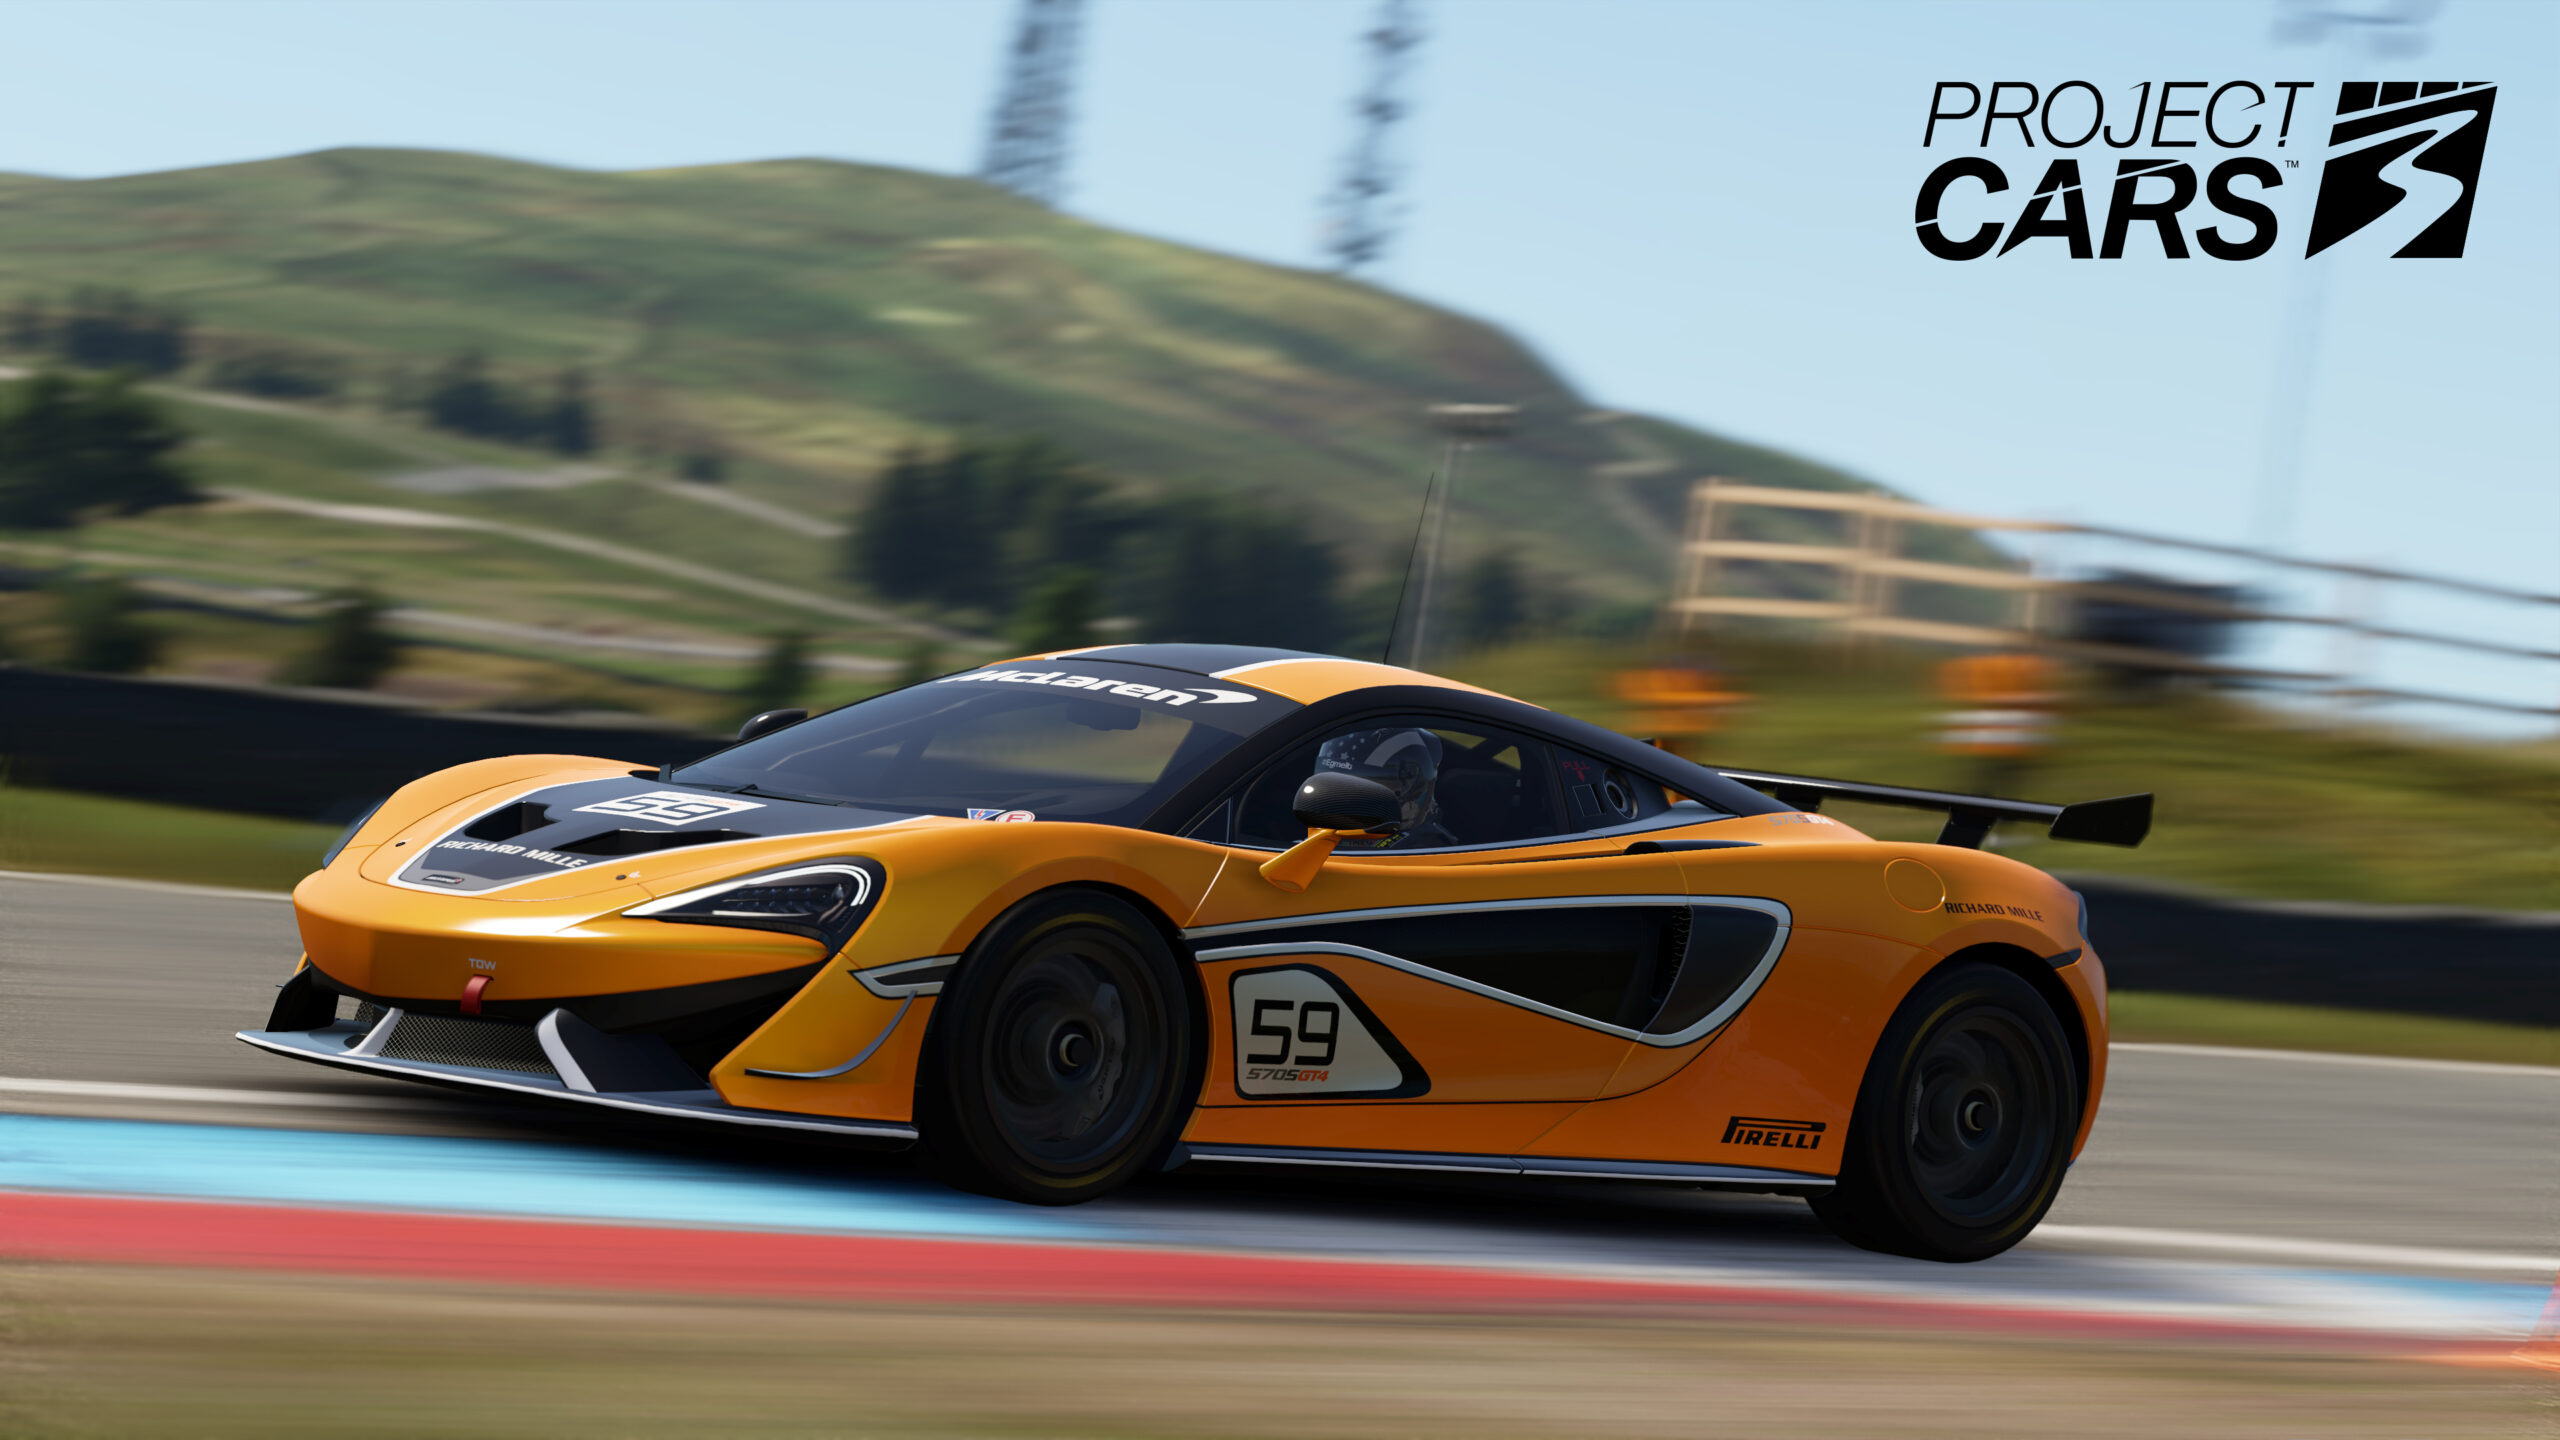 New Project Cars 3 Vehicle Wallpapers